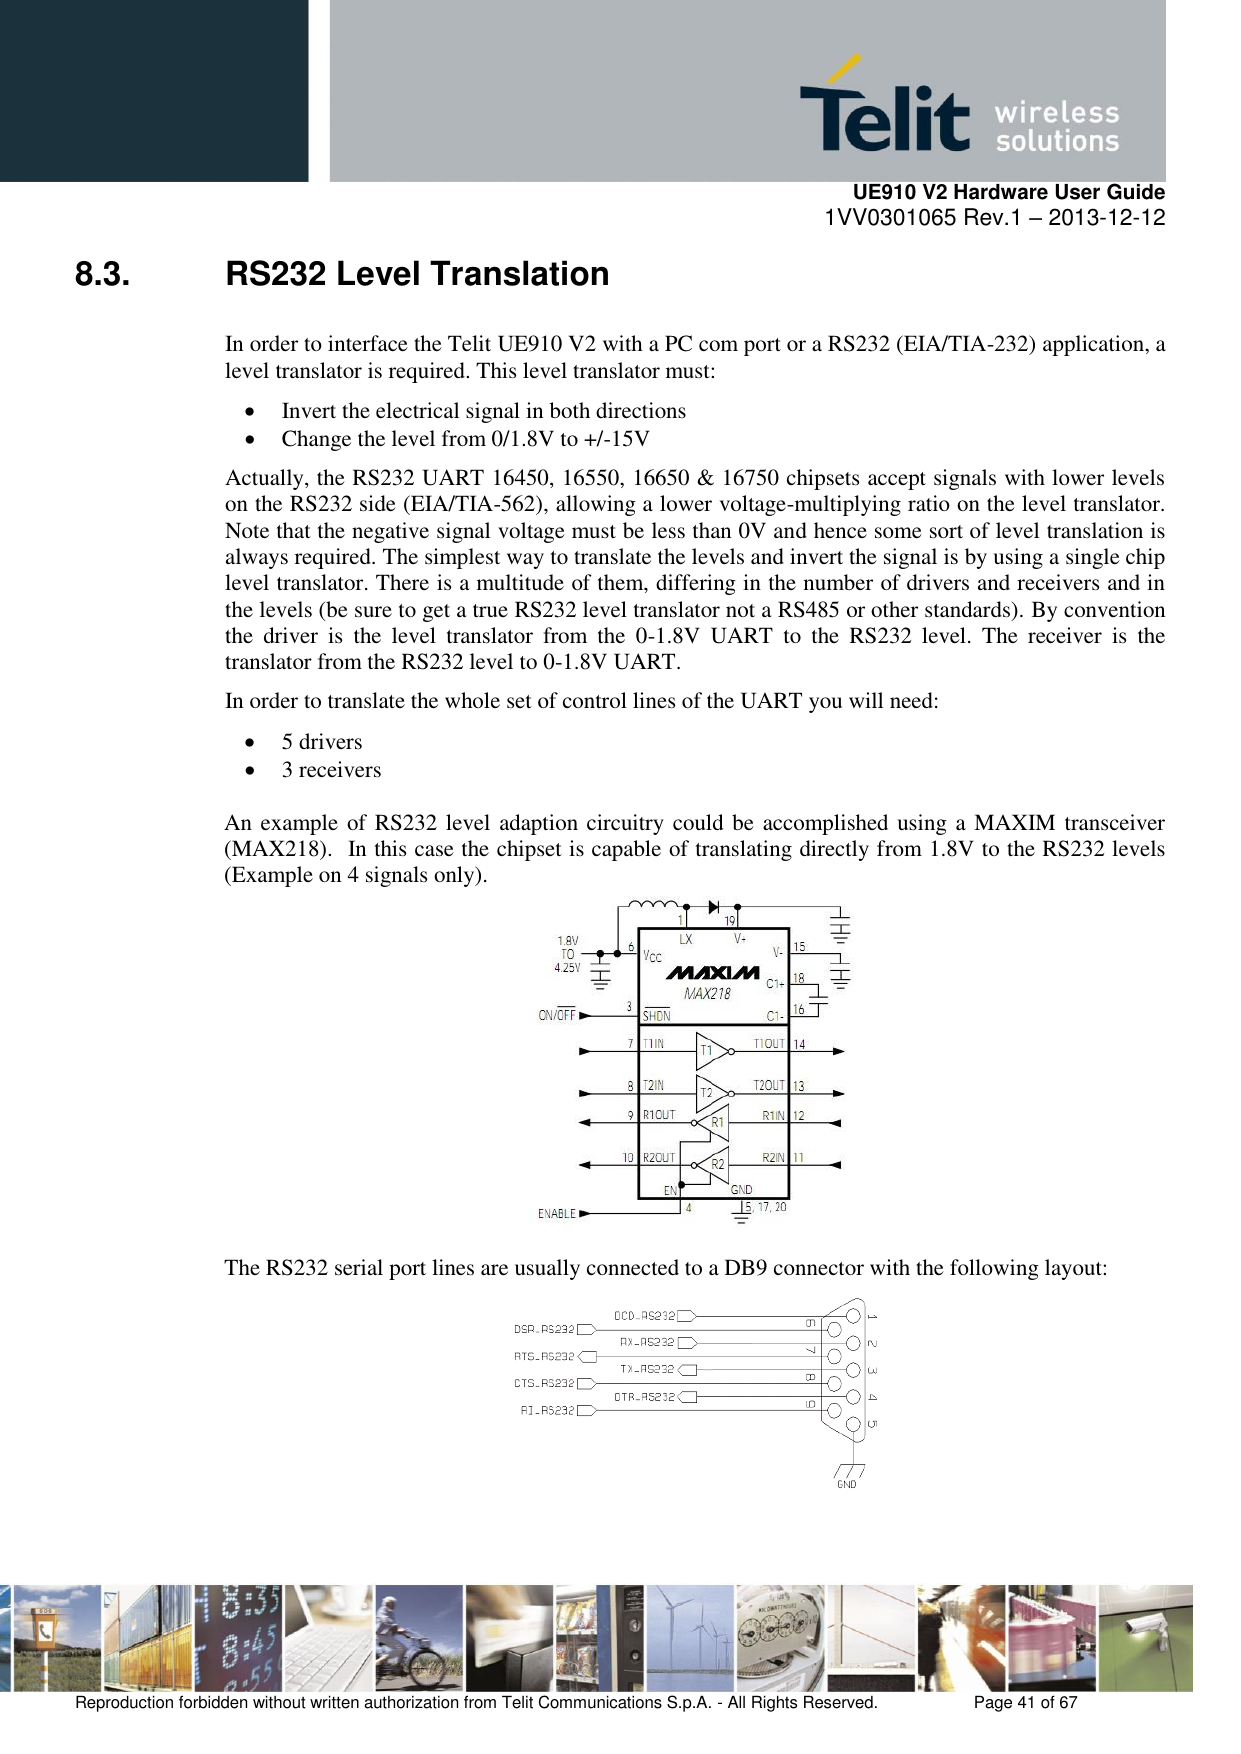     UE910 V2 Hardware User Guide 1VV0301065 Rev.1 – 2013-12-12  Reproduction forbidden without written authorization from Telit Communications S.p.A. - All Rights Reserved.    Page 41 of 67                                                     8.3.  RS232 Level Translation In order to interface the Telit UE910 V2 with a PC com port or a RS232 (EIA/TIA-232) application, a level translator is required. This level translator must:  Invert the electrical signal in both directions  Change the level from 0/1.8V to +/-15V Actually, the RS232 UART 16450, 16550, 16650 &amp; 16750 chipsets accept signals with lower levels on the RS232 side (EIA/TIA-562), allowing a lower voltage-multiplying ratio on the level translator. Note that the negative signal voltage must be less than 0V and hence some sort of level translation is always required. The simplest way to translate the levels and invert the signal is by using a single chip level translator. There is a multitude of them, differing in the number of drivers and receivers and in the levels (be sure to get a true RS232 level translator not a RS485 or other standards). By convention the  driver  is  the  level  translator  from  the  0-1.8V  UART  to  the  RS232  level.  The  receiver  is  the translator from the RS232 level to 0-1.8V UART. In order to translate the whole set of control lines of the UART you will need:  5 drivers  3 receivers  An example of RS232 level adaption circuitry could be accomplished using a MAXIM transceiver (MAX218).  In this case the chipset is capable of translating directly from 1.8V to the RS232 levels (Example on 4 signals only).   The RS232 serial port lines are usually connected to a DB9 connector with the following layout:   